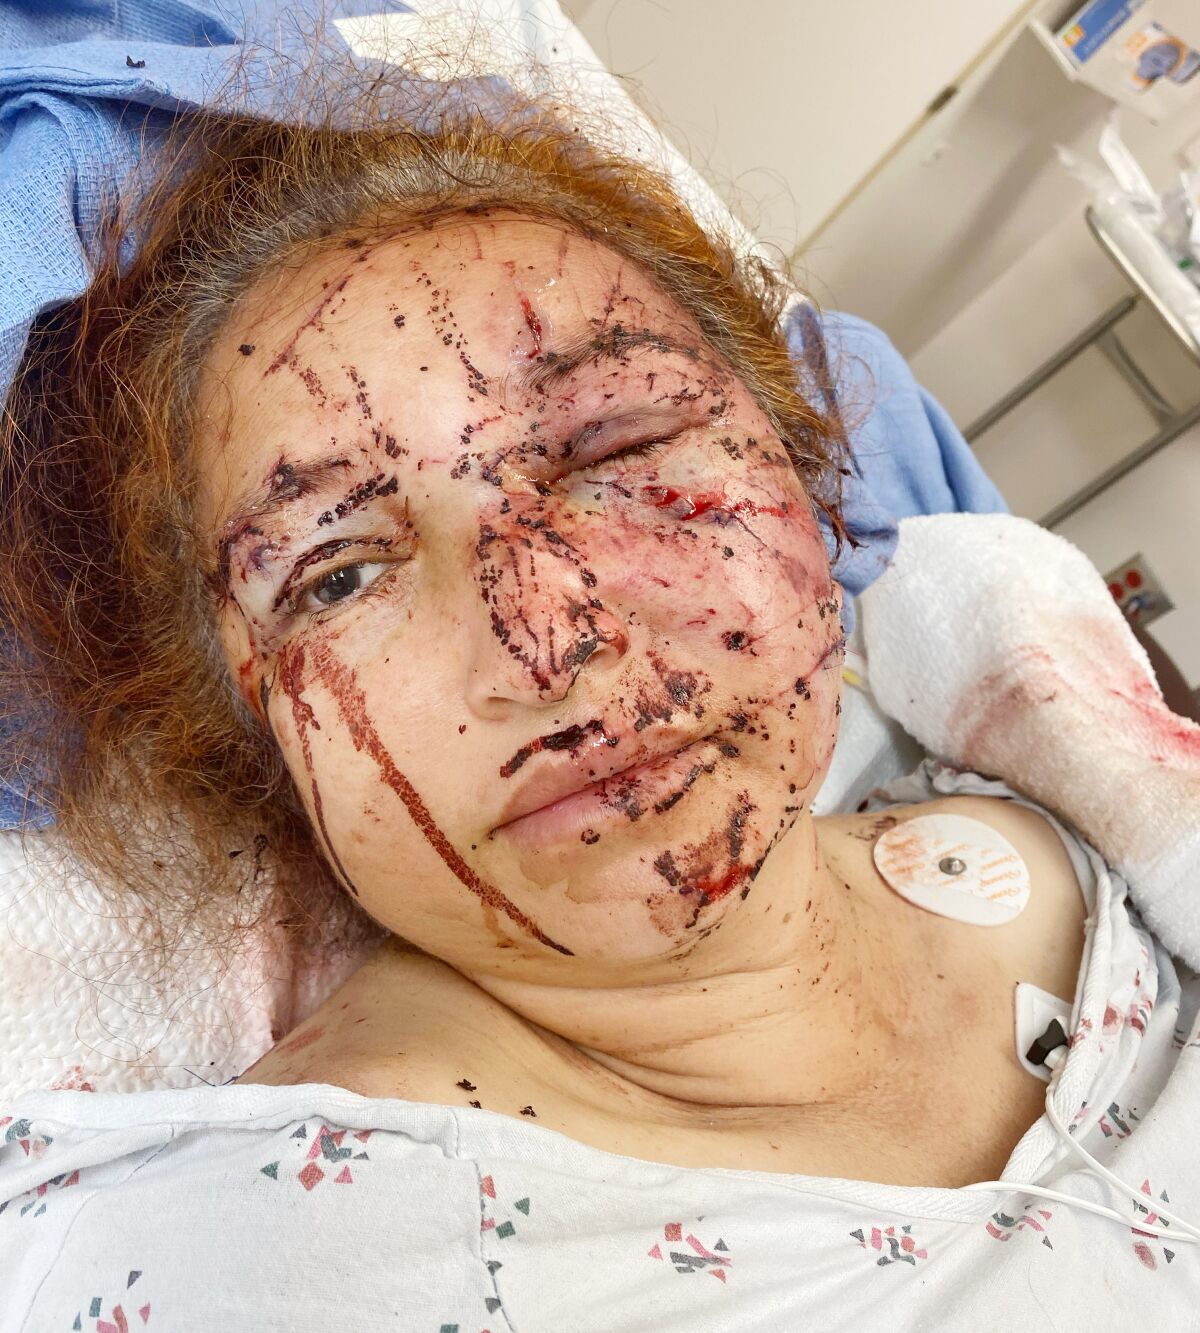 Claudia Silva, wearing a hospital gown, with severe injuries to her face.